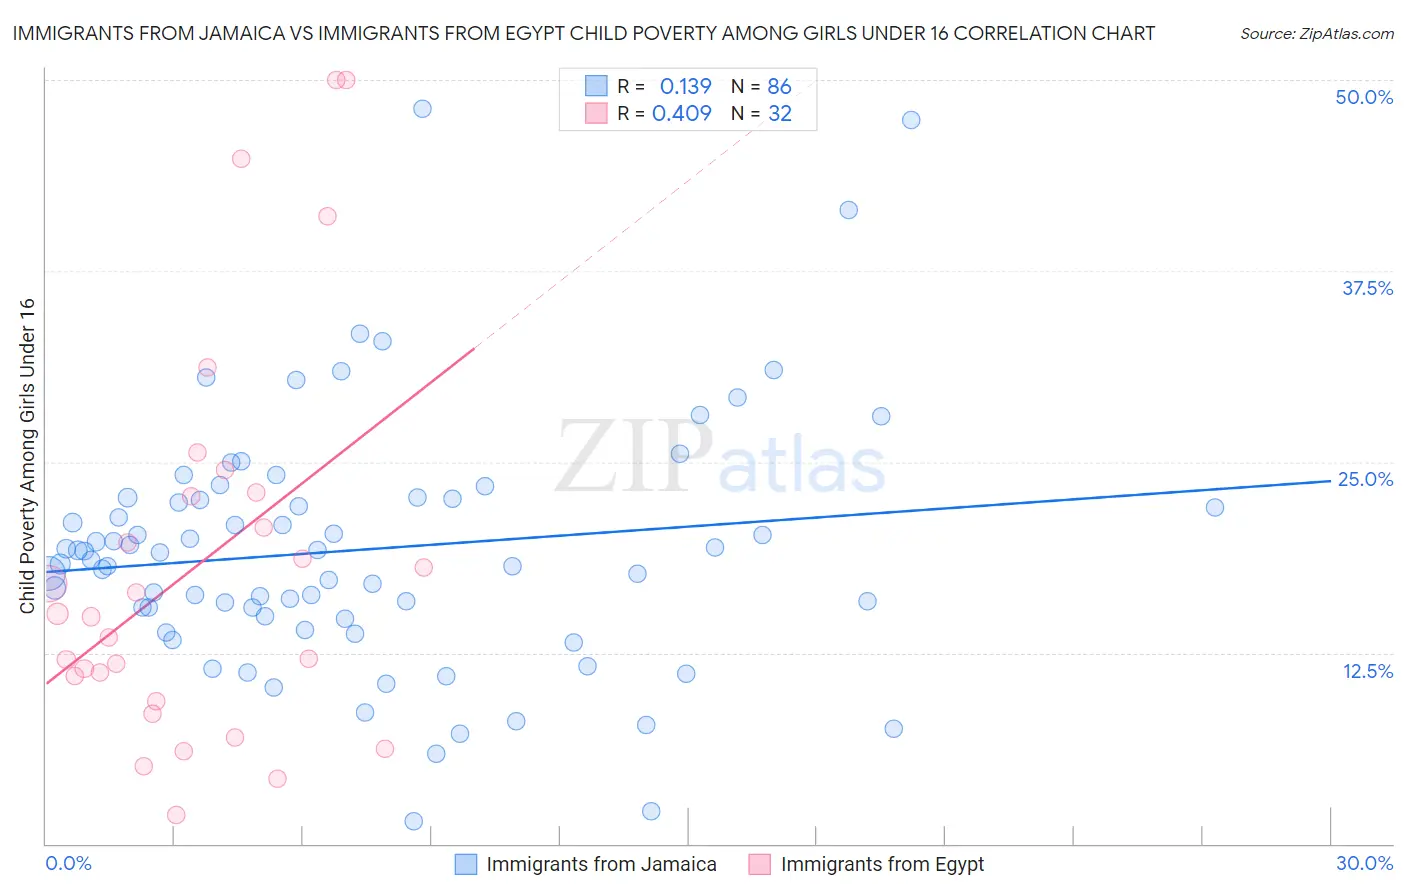 Immigrants from Jamaica vs Immigrants from Egypt Child Poverty Among Girls Under 16